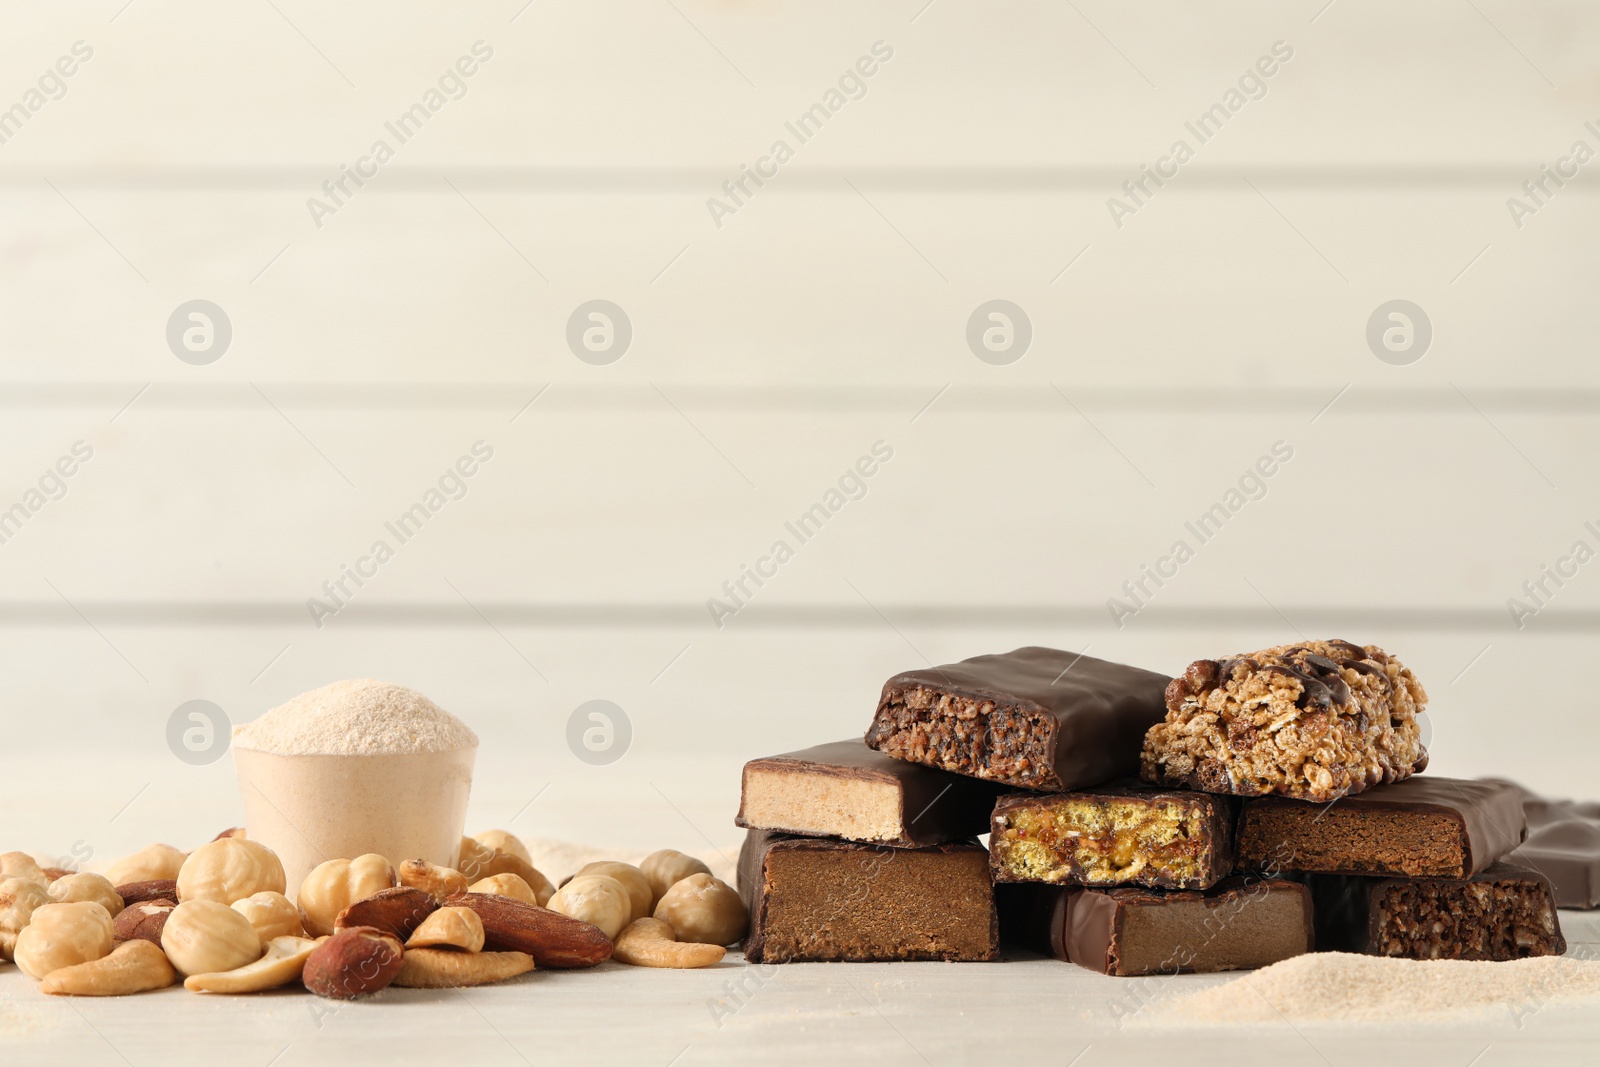 Photo of Different tasty energy bars, nuts and protein powder on white table, space for text